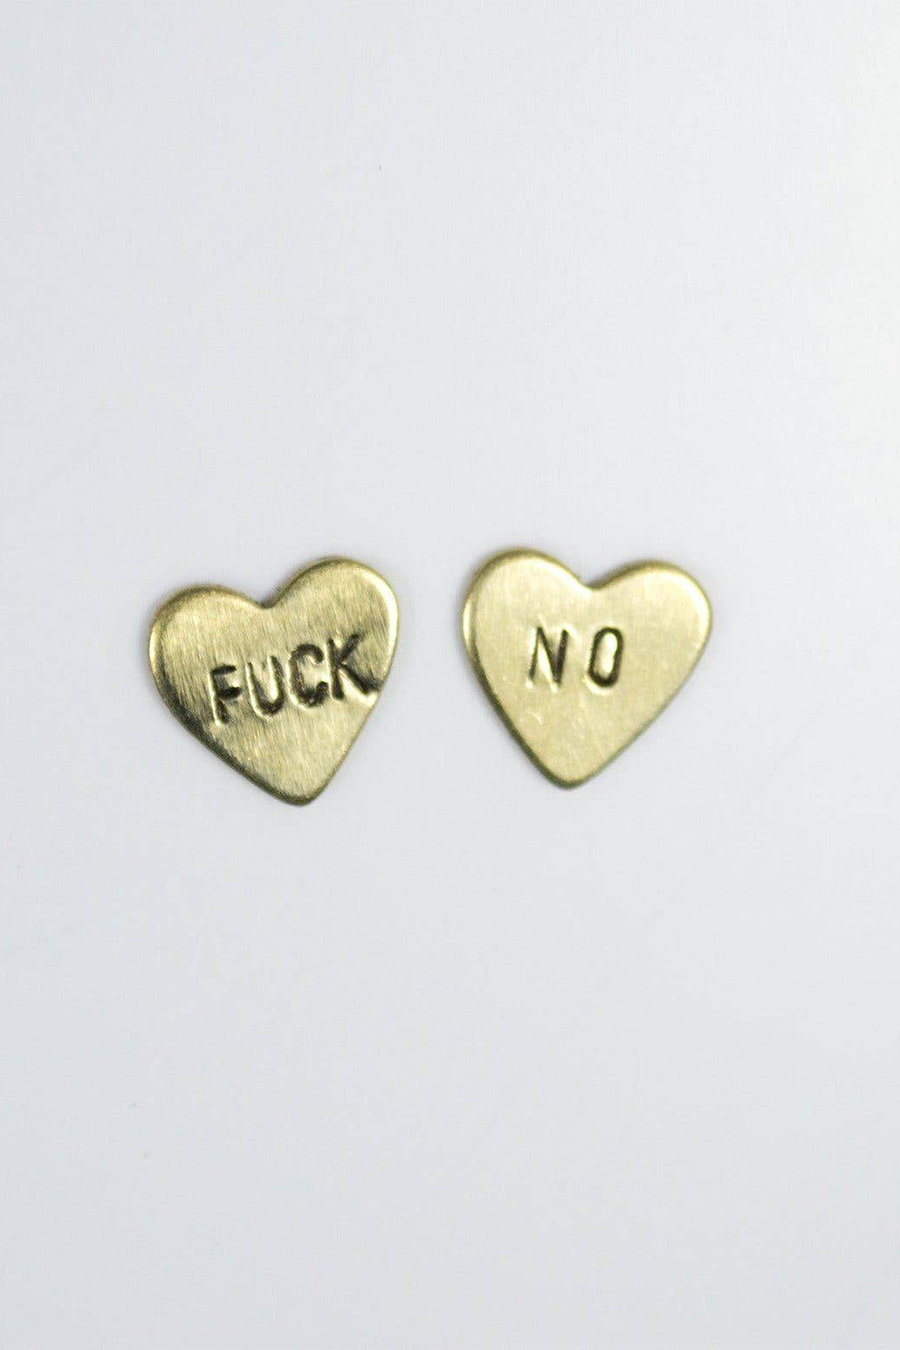 Fuck No Heart Earrings | Brass - Main Image Number 1 of 2